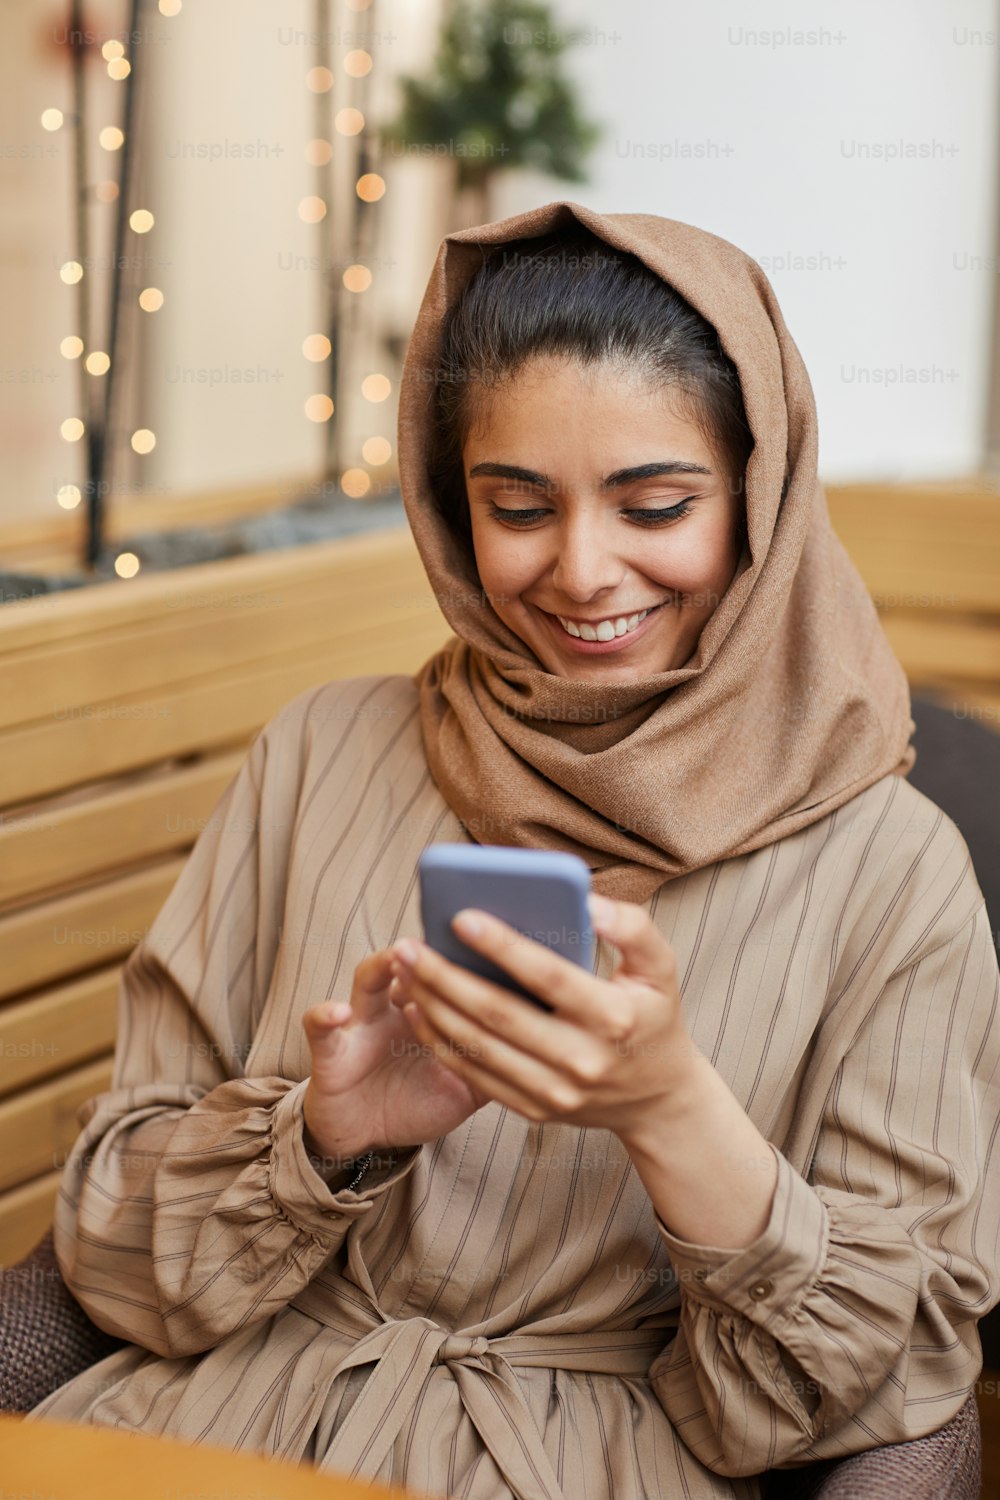 Vertical portrait of beautiful Middle-Eastern woman smiling happily while looking at smartphone screen in cafe